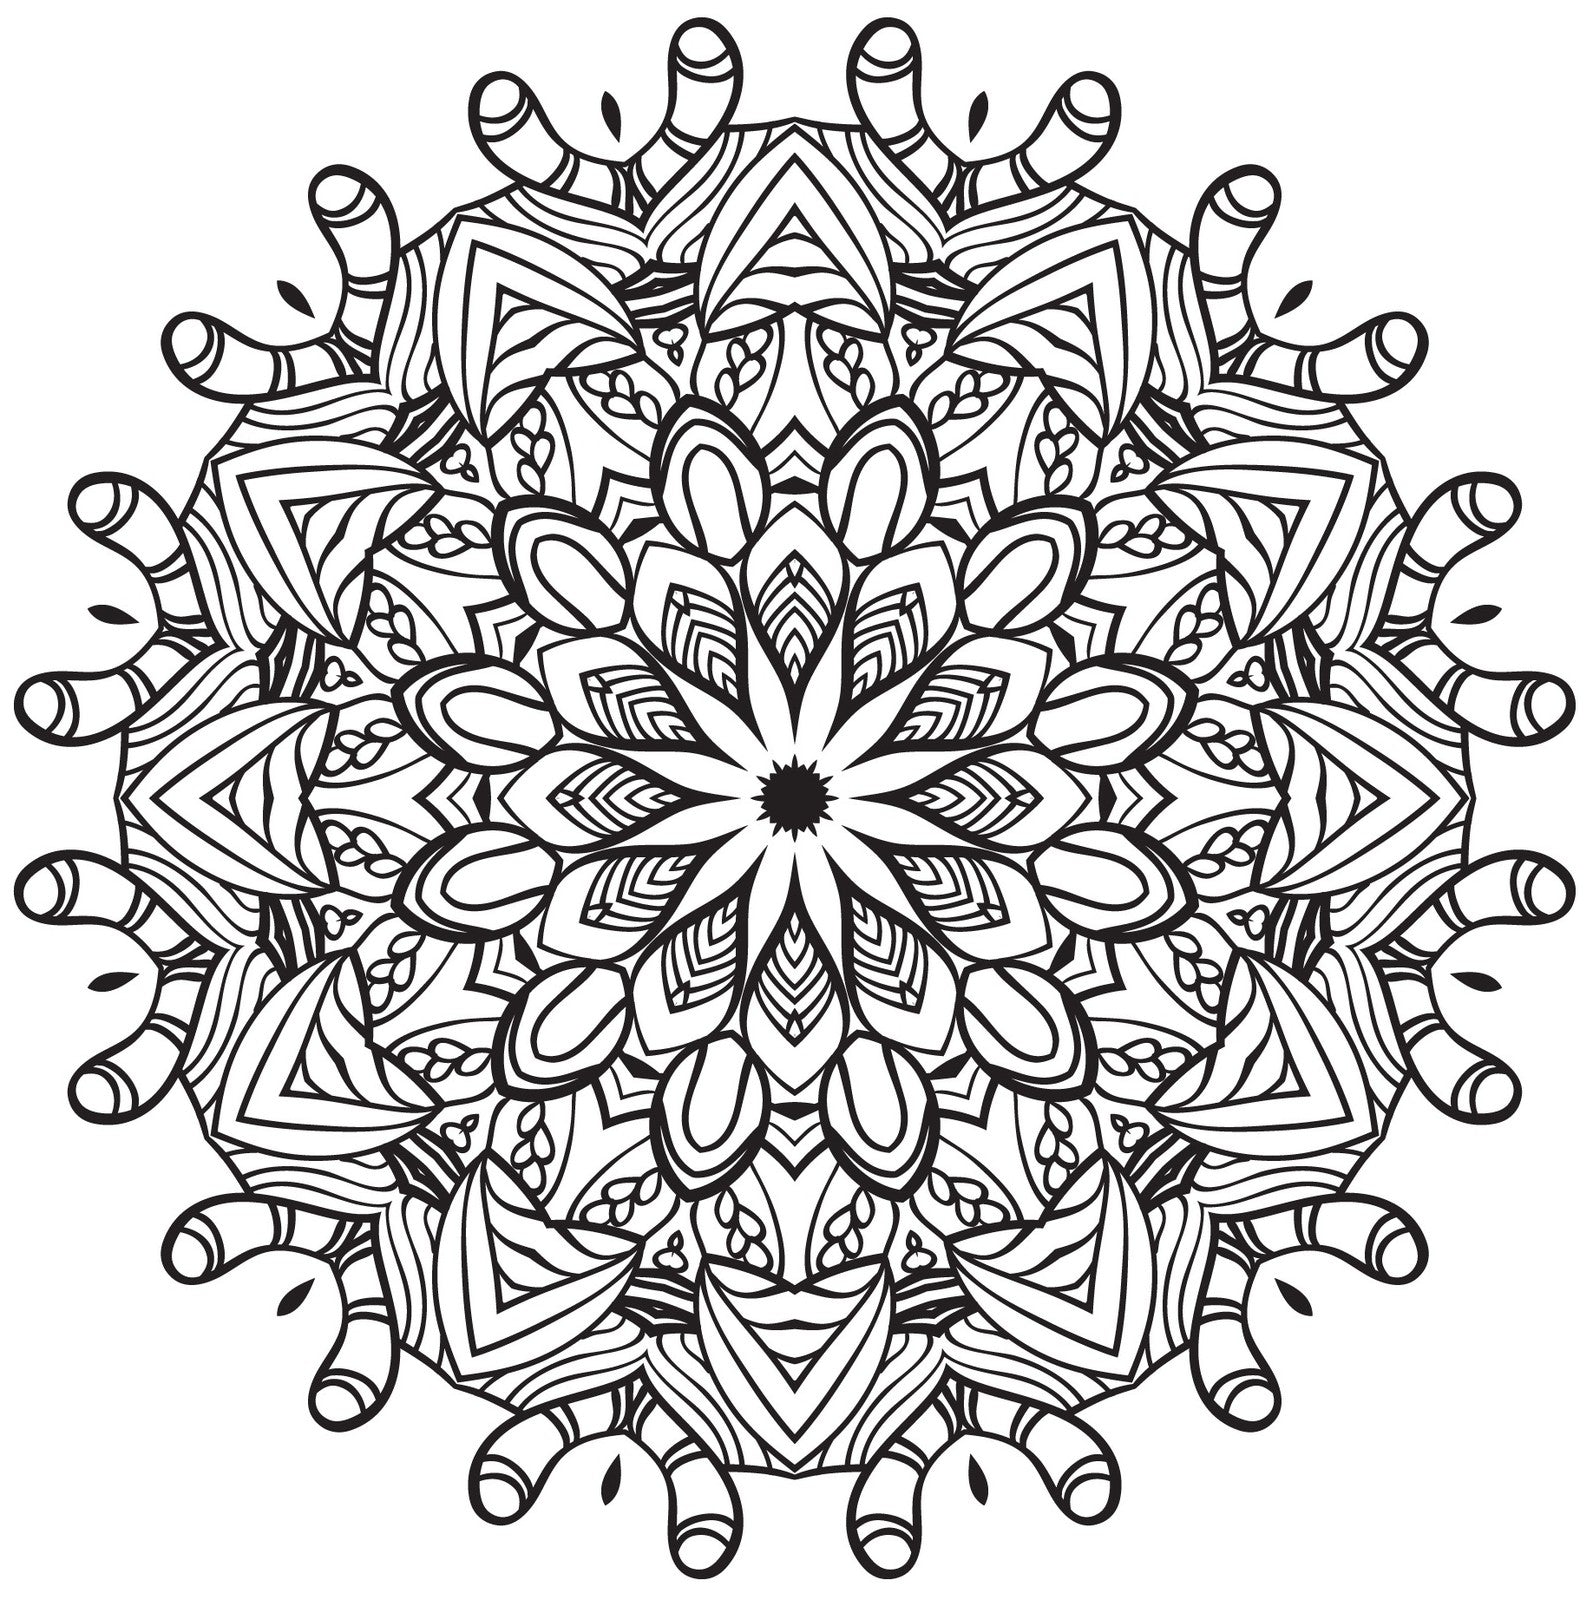 Mandala For Life - Seamless Relaxing Therapy Coloring Book